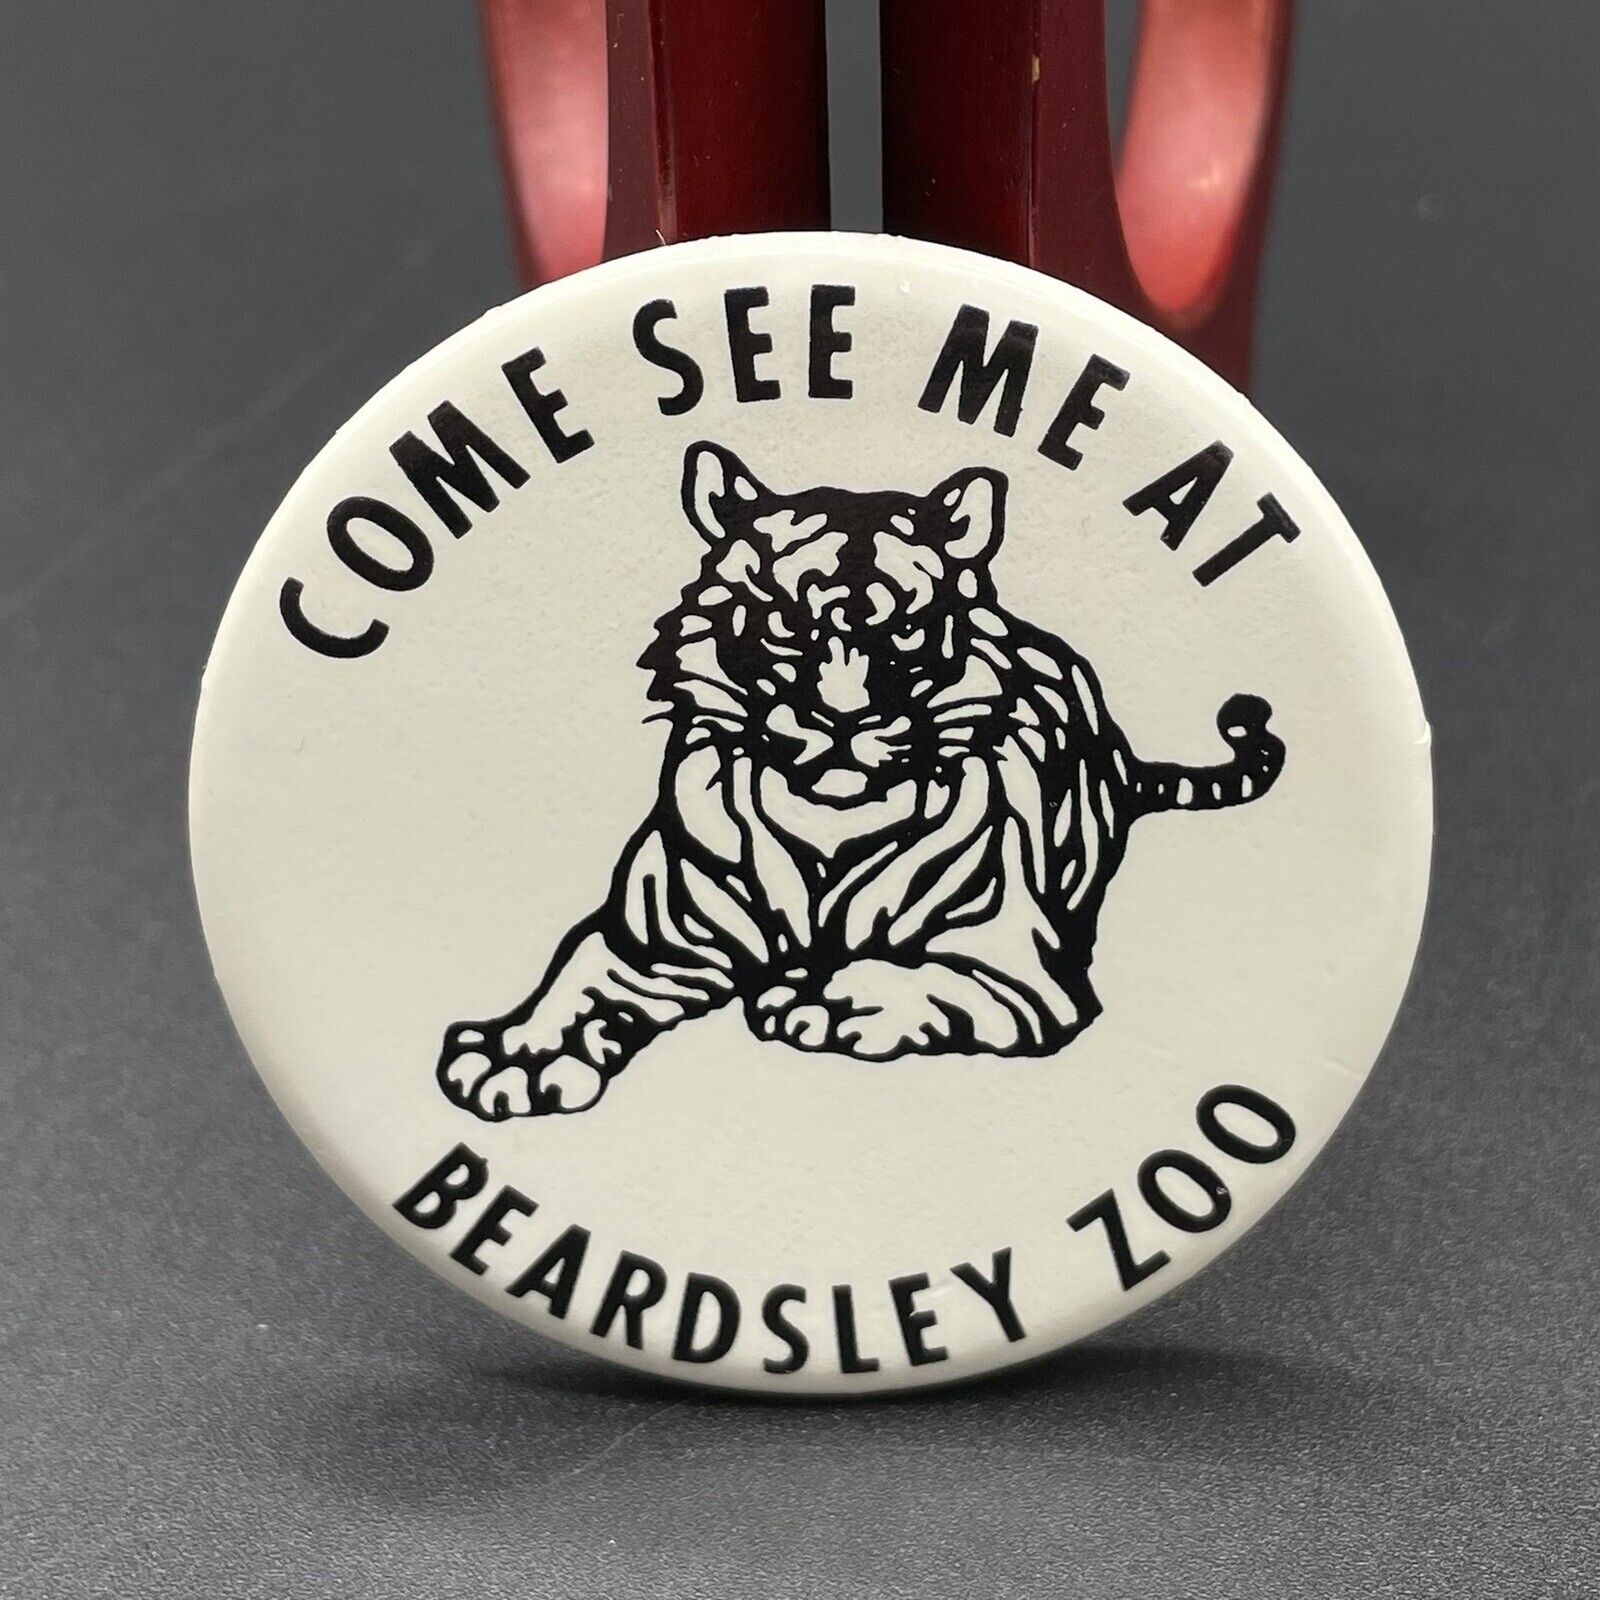 Come See Me At Beardsley Zoo Tiger Pin Bridgeport Connecticut Vintage